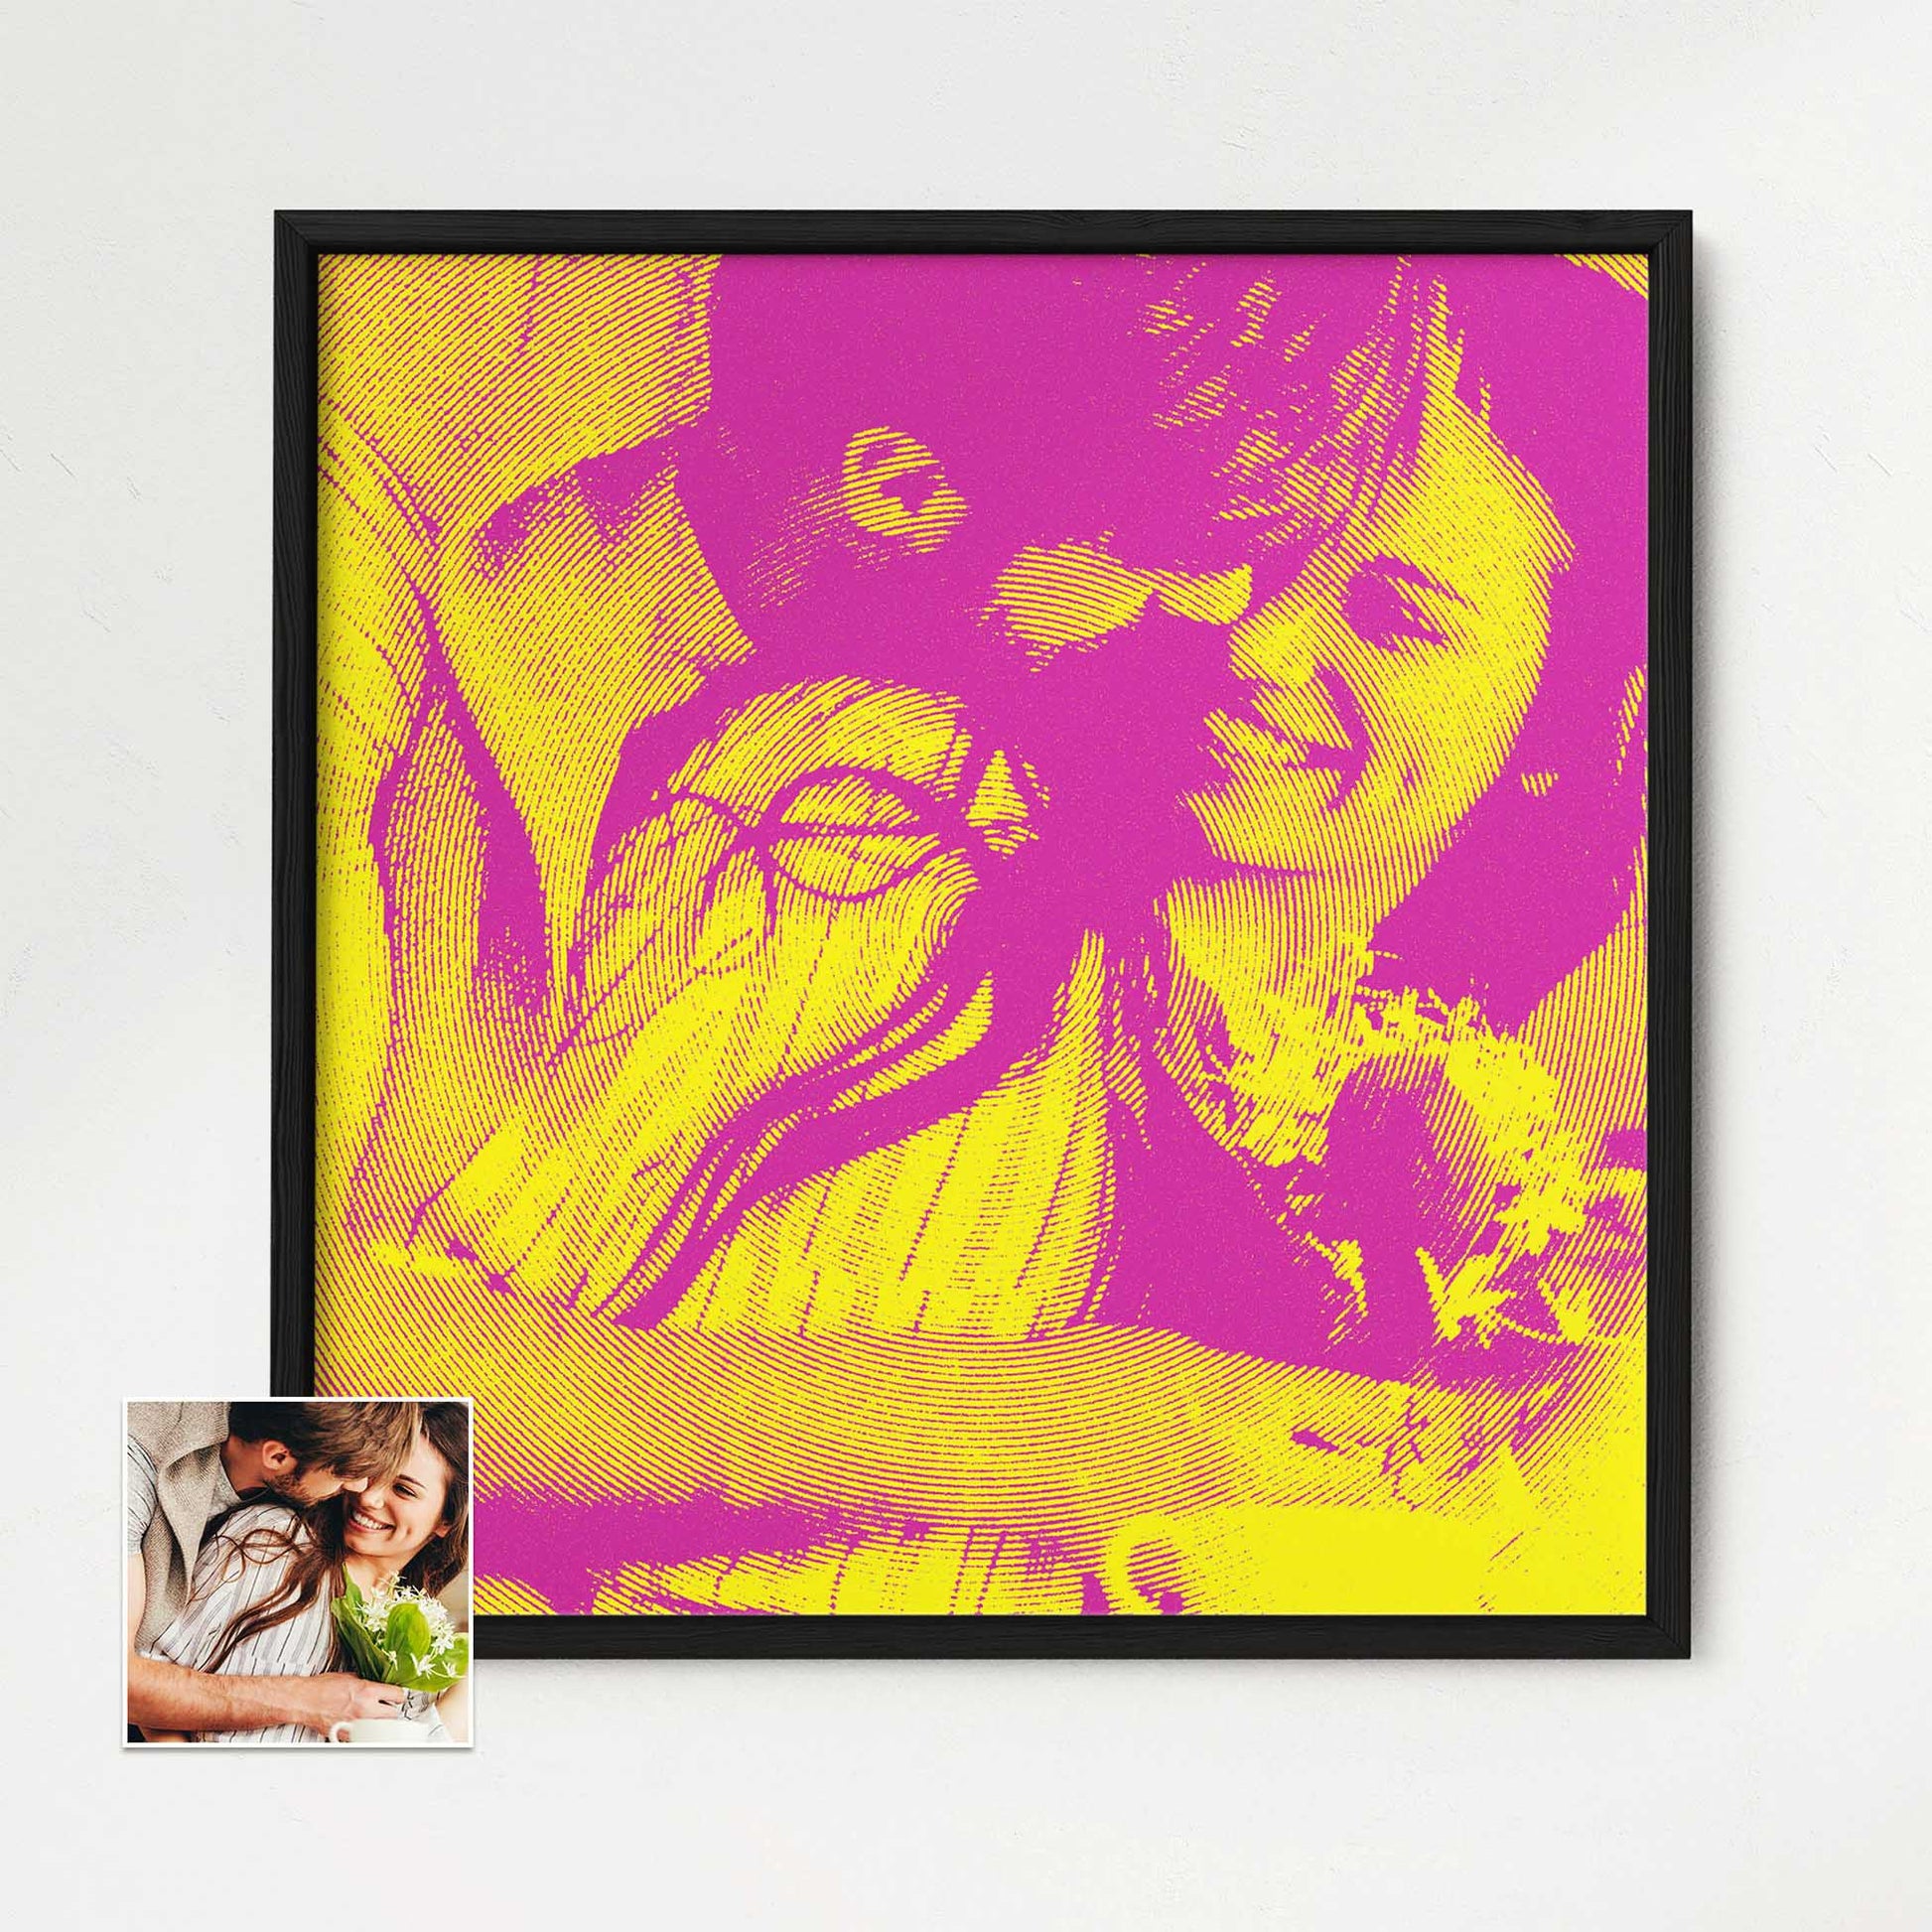 Immerse yourself in the vibrant world of Personalised Yellow & Pink Texture Framed Print. Its fun and energetic colors evoke vivid emotions, filling your space with laughter and smiles. Crafted from your photo, this chic and cool artwork 